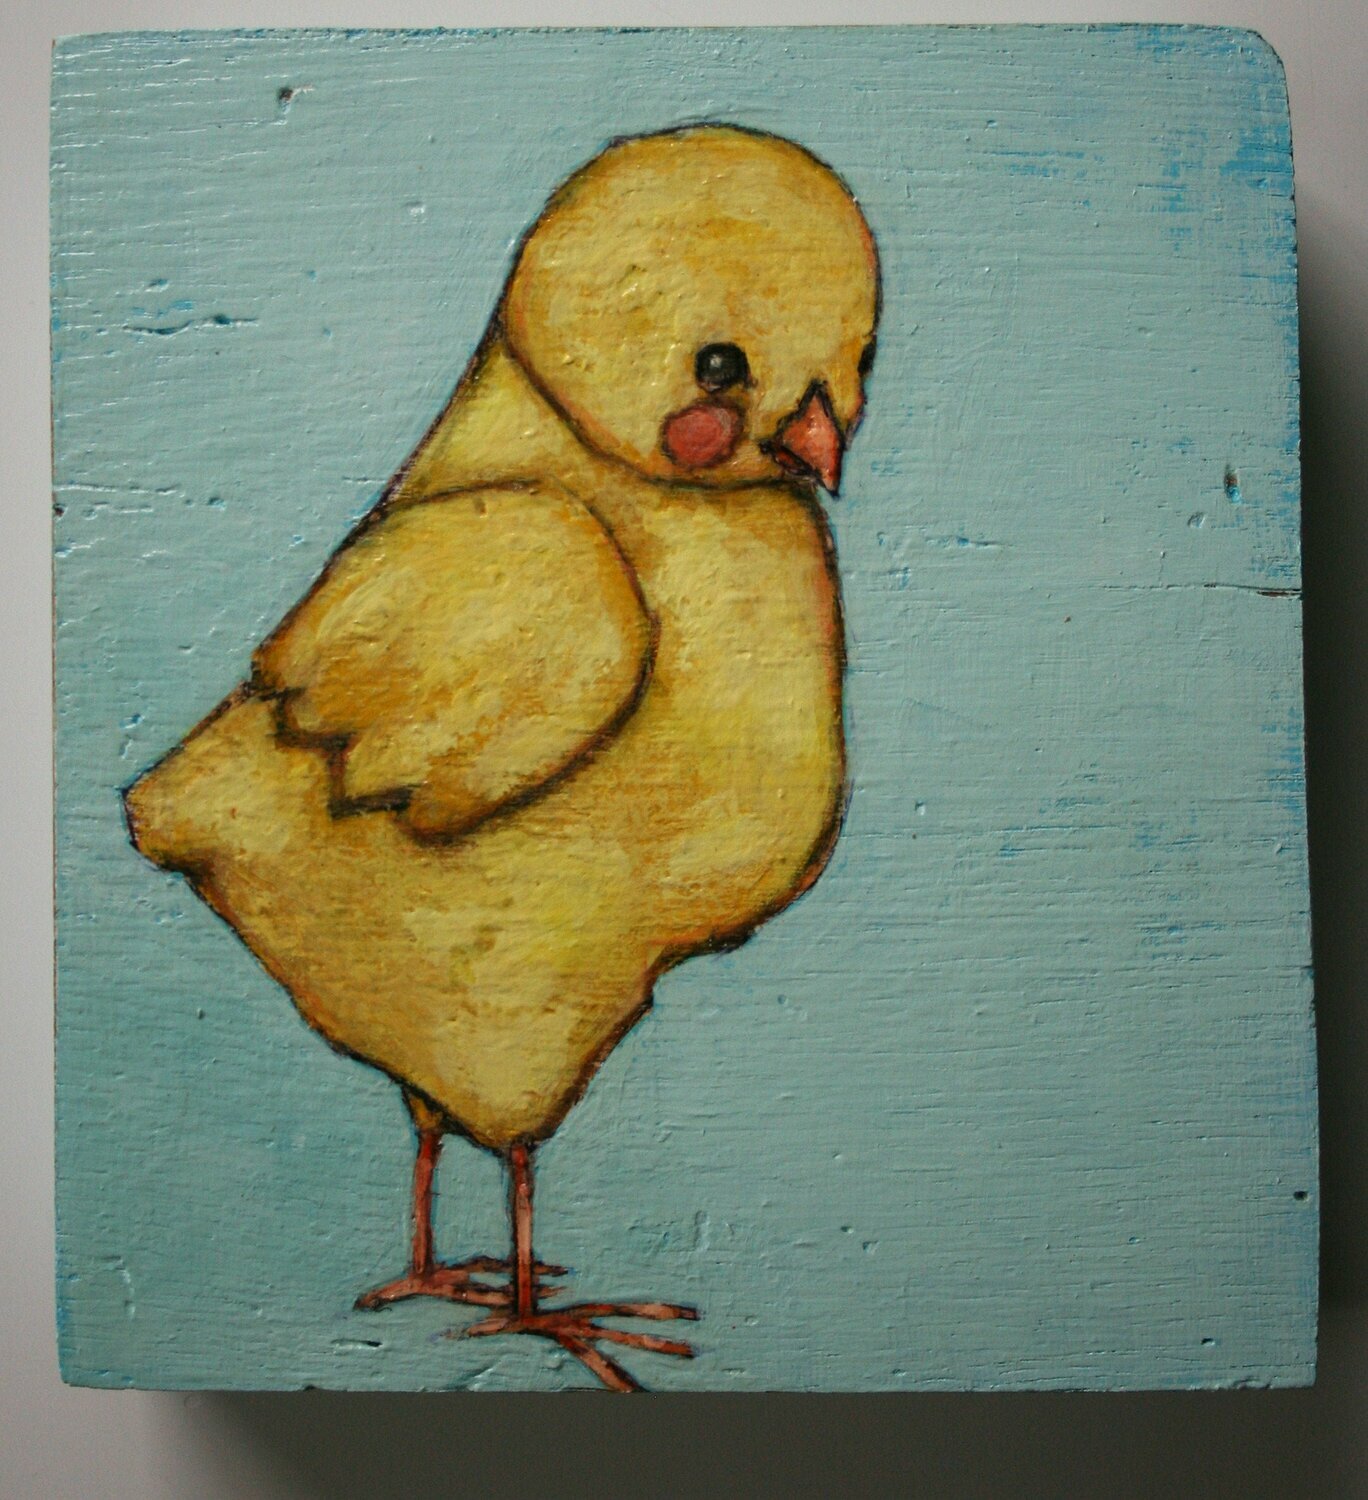 baby chicken yellow chick painting original a2n2koon wall art on thick block of reclaimed wood whimsical chicken artwork for nursery room